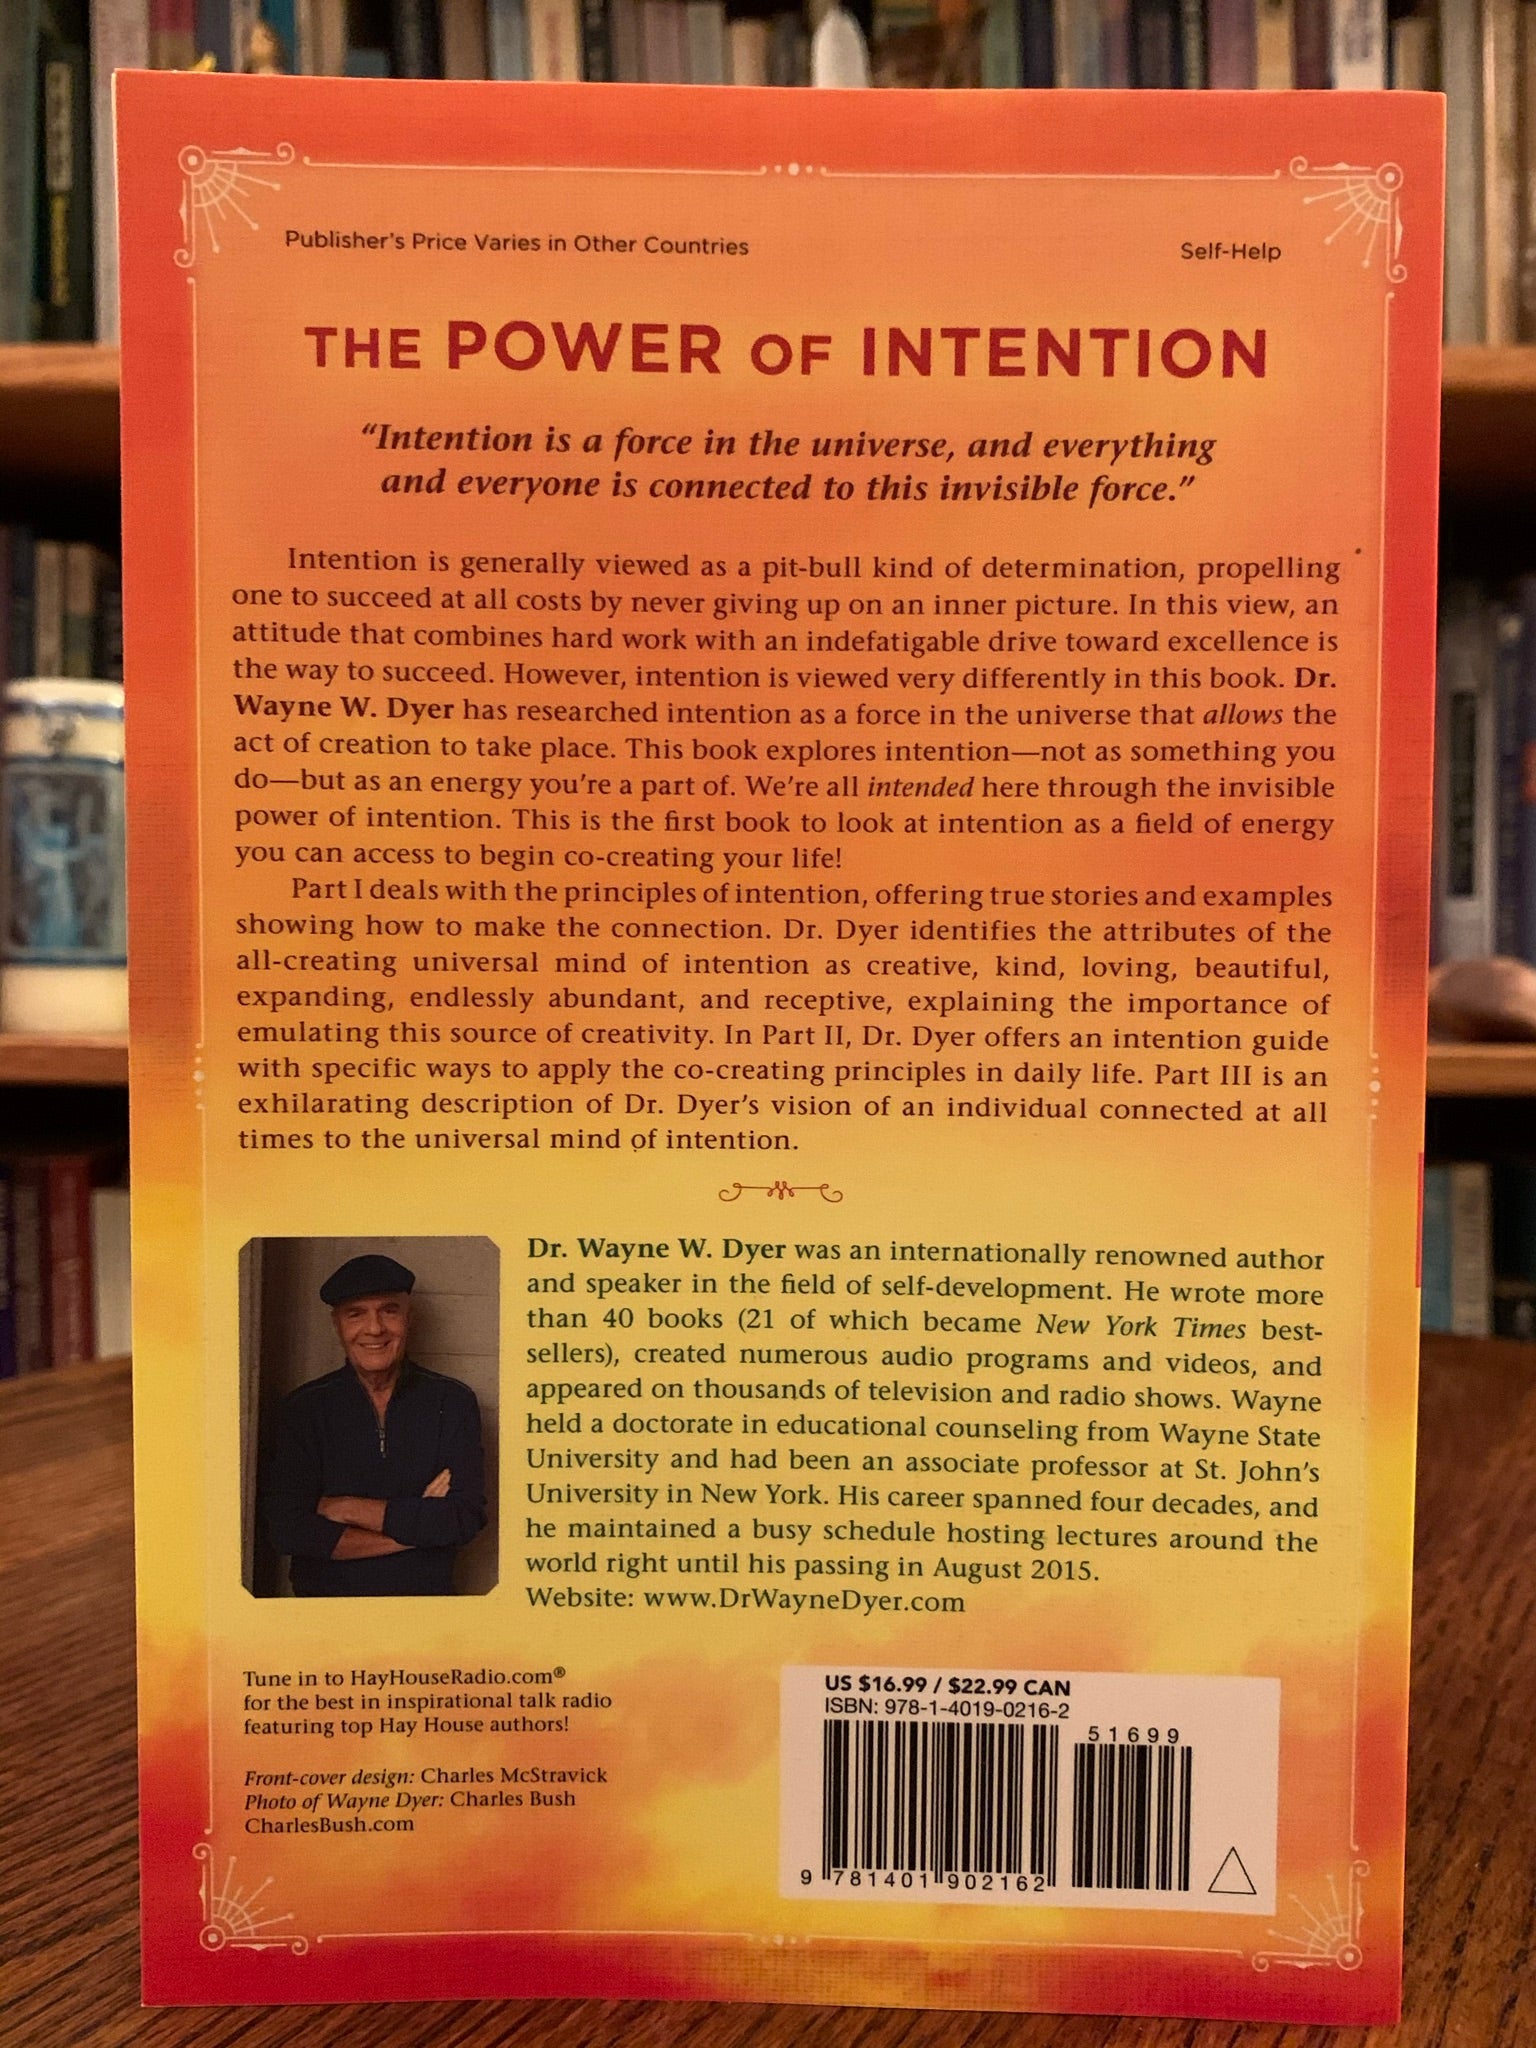 Close-up of Back Cover. The Power of Intention by Wayne Dyer is a very powerful book about intention and how to use it to manifest the life you desire. "This book explores intention - not as something you do - but as an energy you are a part of. This is the first book to [to have looked at] intention as a field of energy you can access to begin co-creating your life." Dyer is a best selling author and published over 40 books, many of which were best sellers. Cost is $16.99